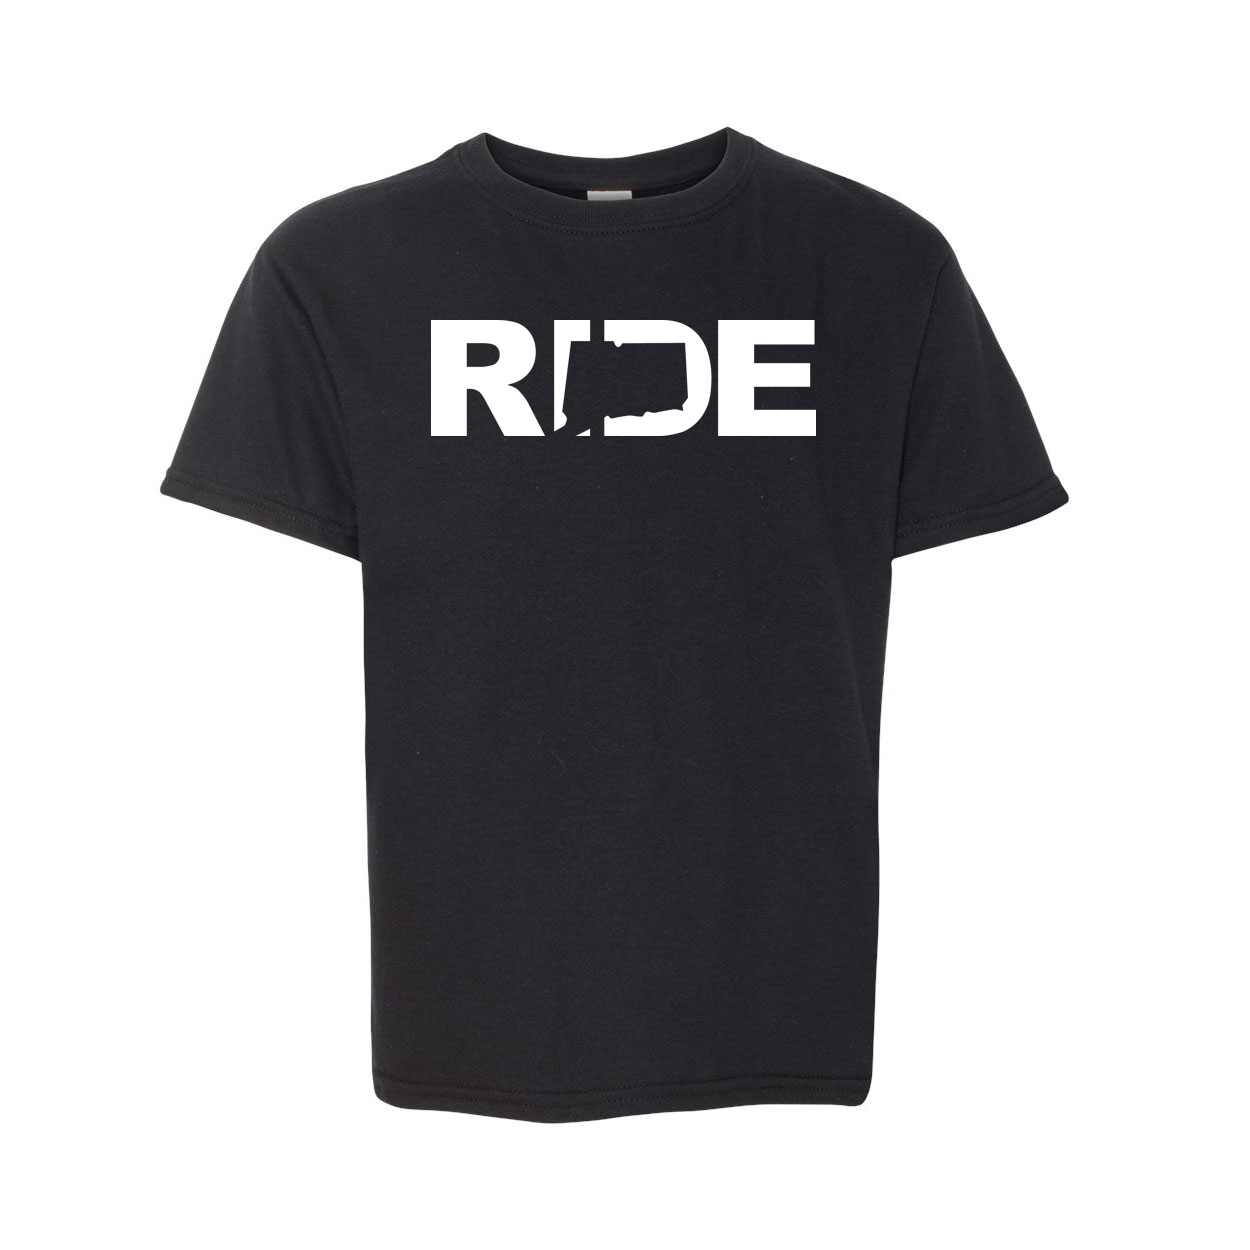 Ride Connecticut Classic Youth T-Shirt Black (White Logo)